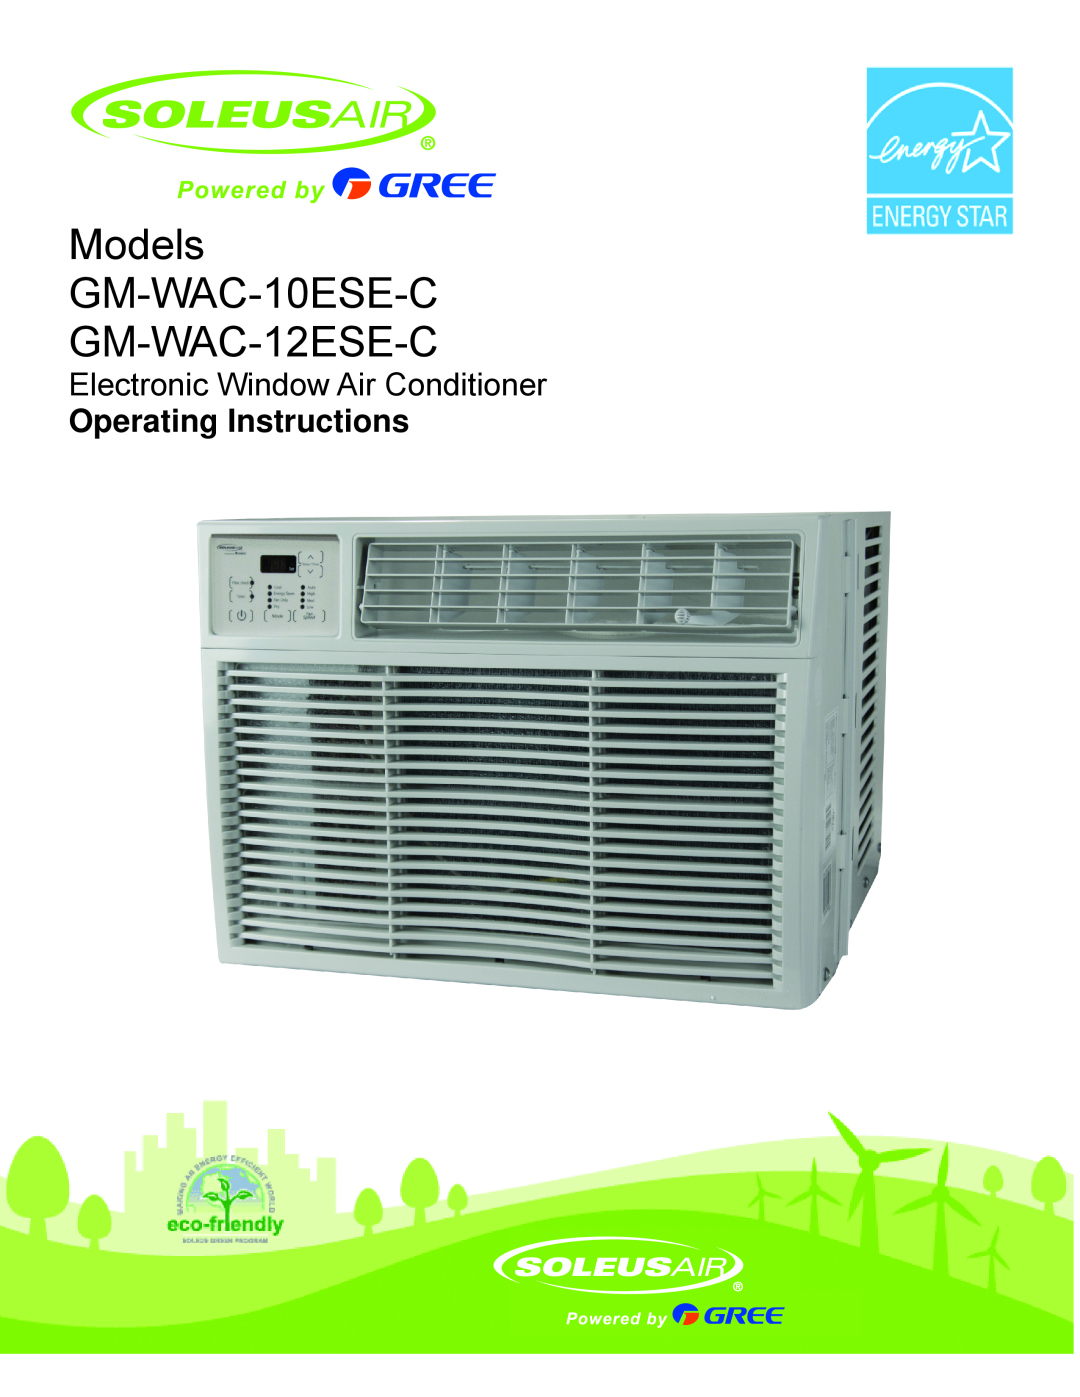 Soleus Air manual Models GM-WAC-10ESE-C GM-WAC-12ESE-C, Electronic Window Air Conditioner, Operating Instructions 